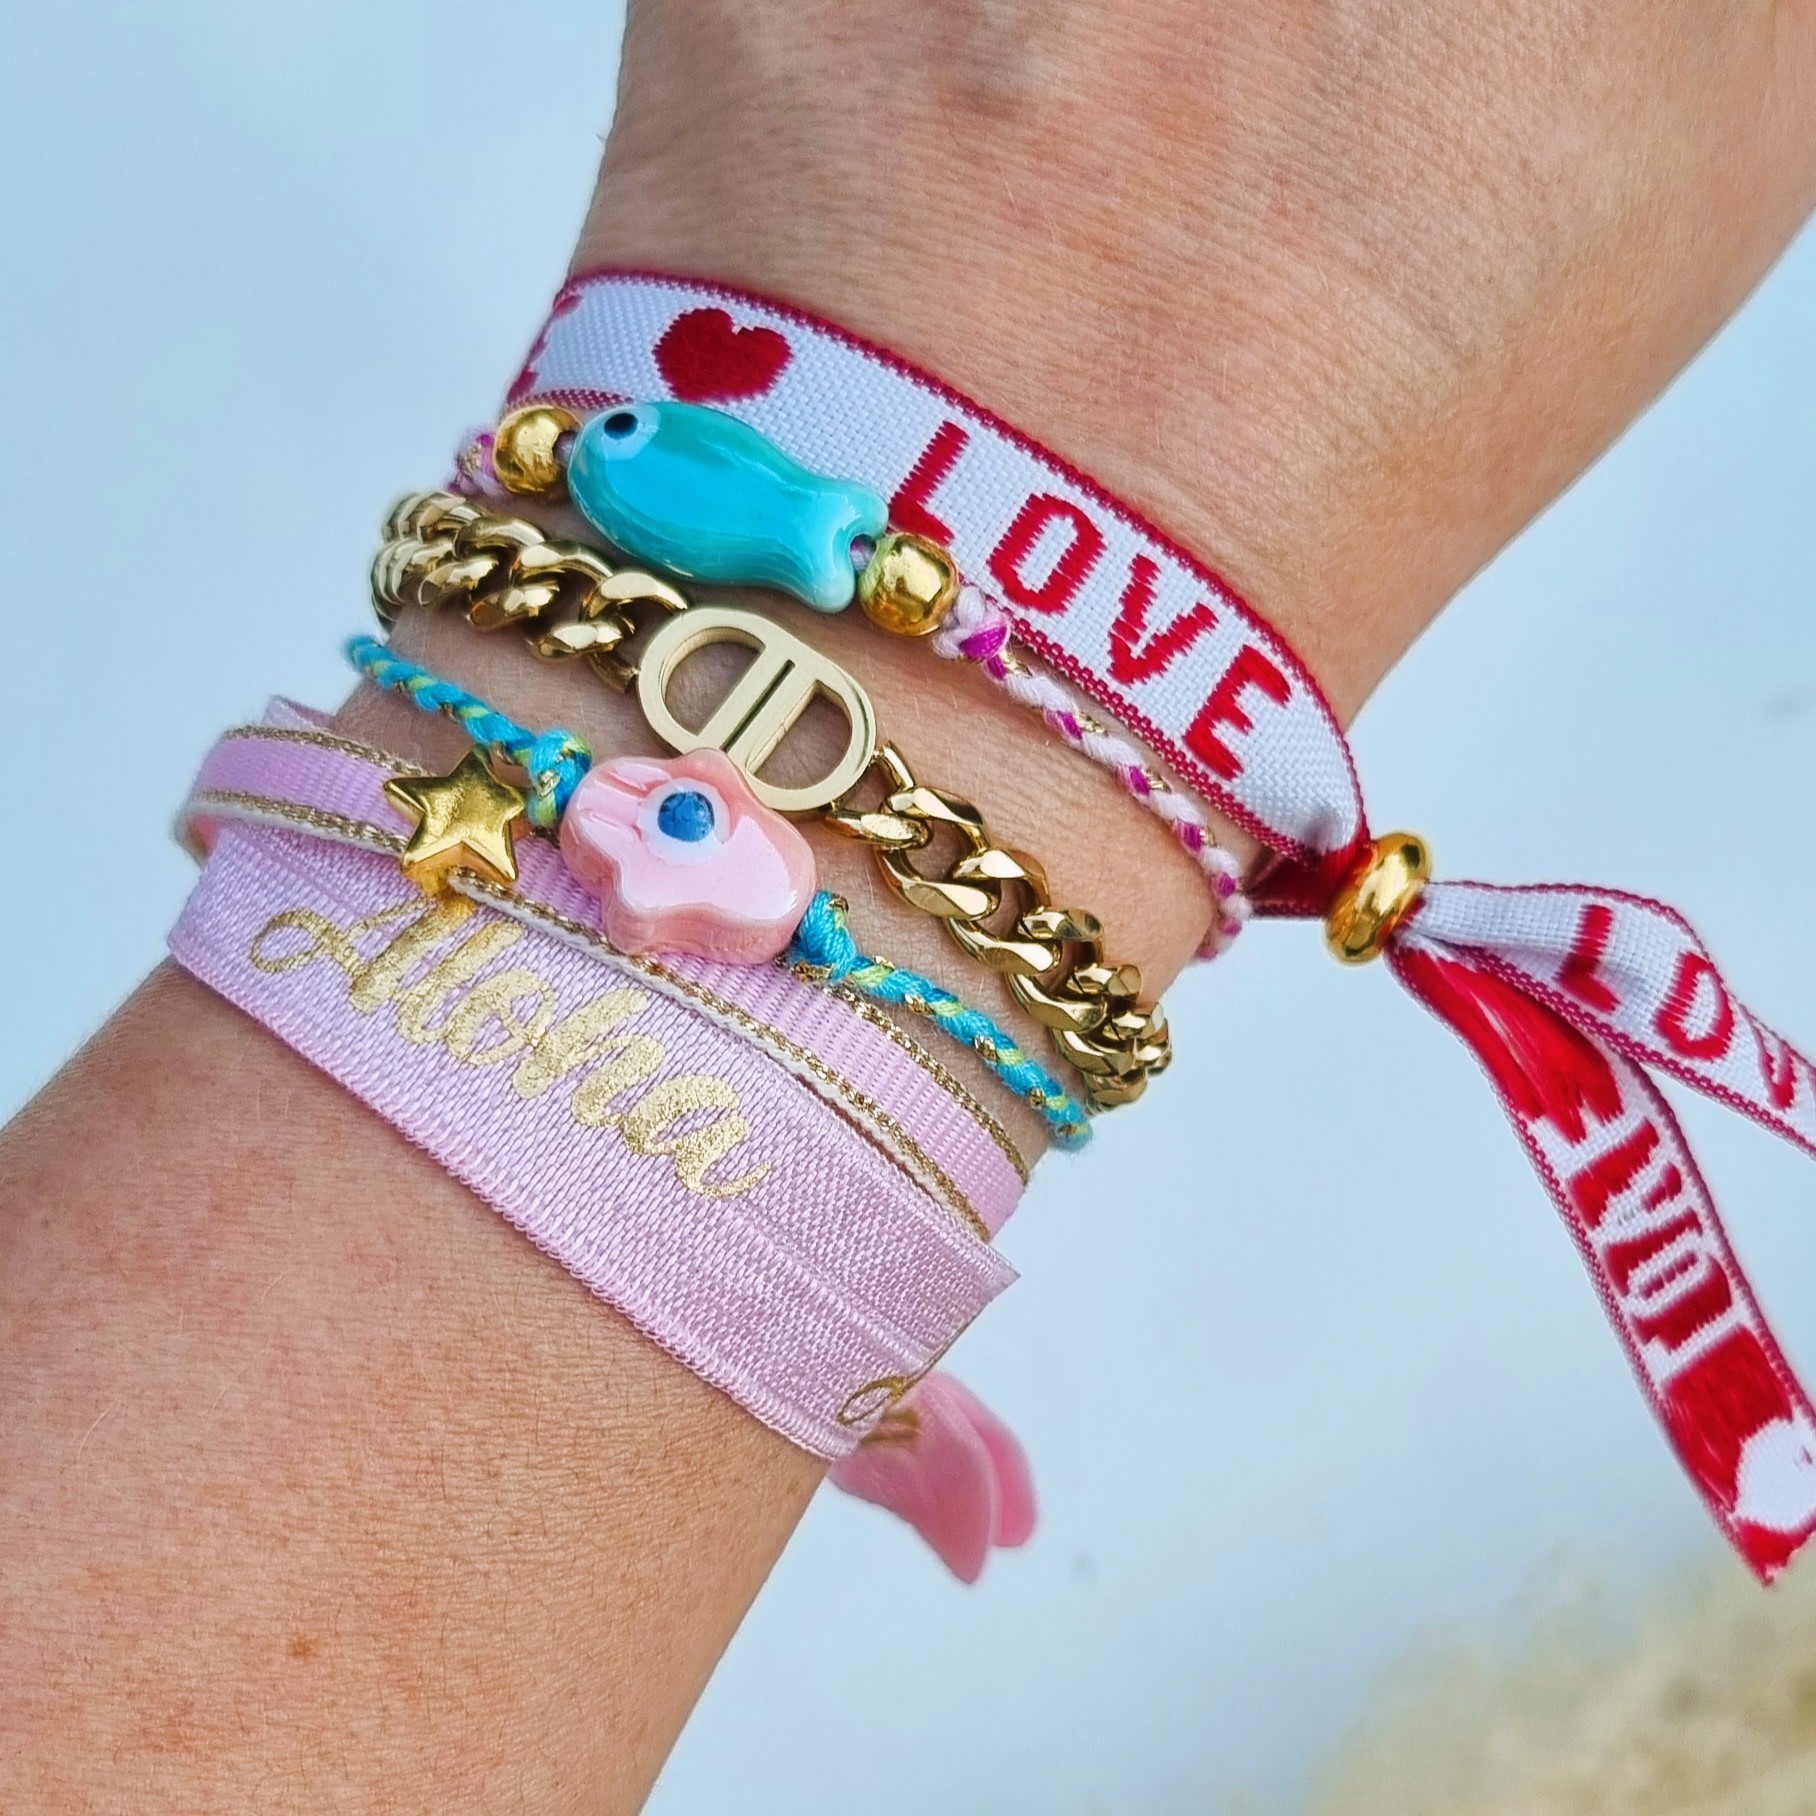 armband-geweven-lint-love-rood-wit-festival-armbandje-fashion-sieraden-musthaves-ibiza-boutique